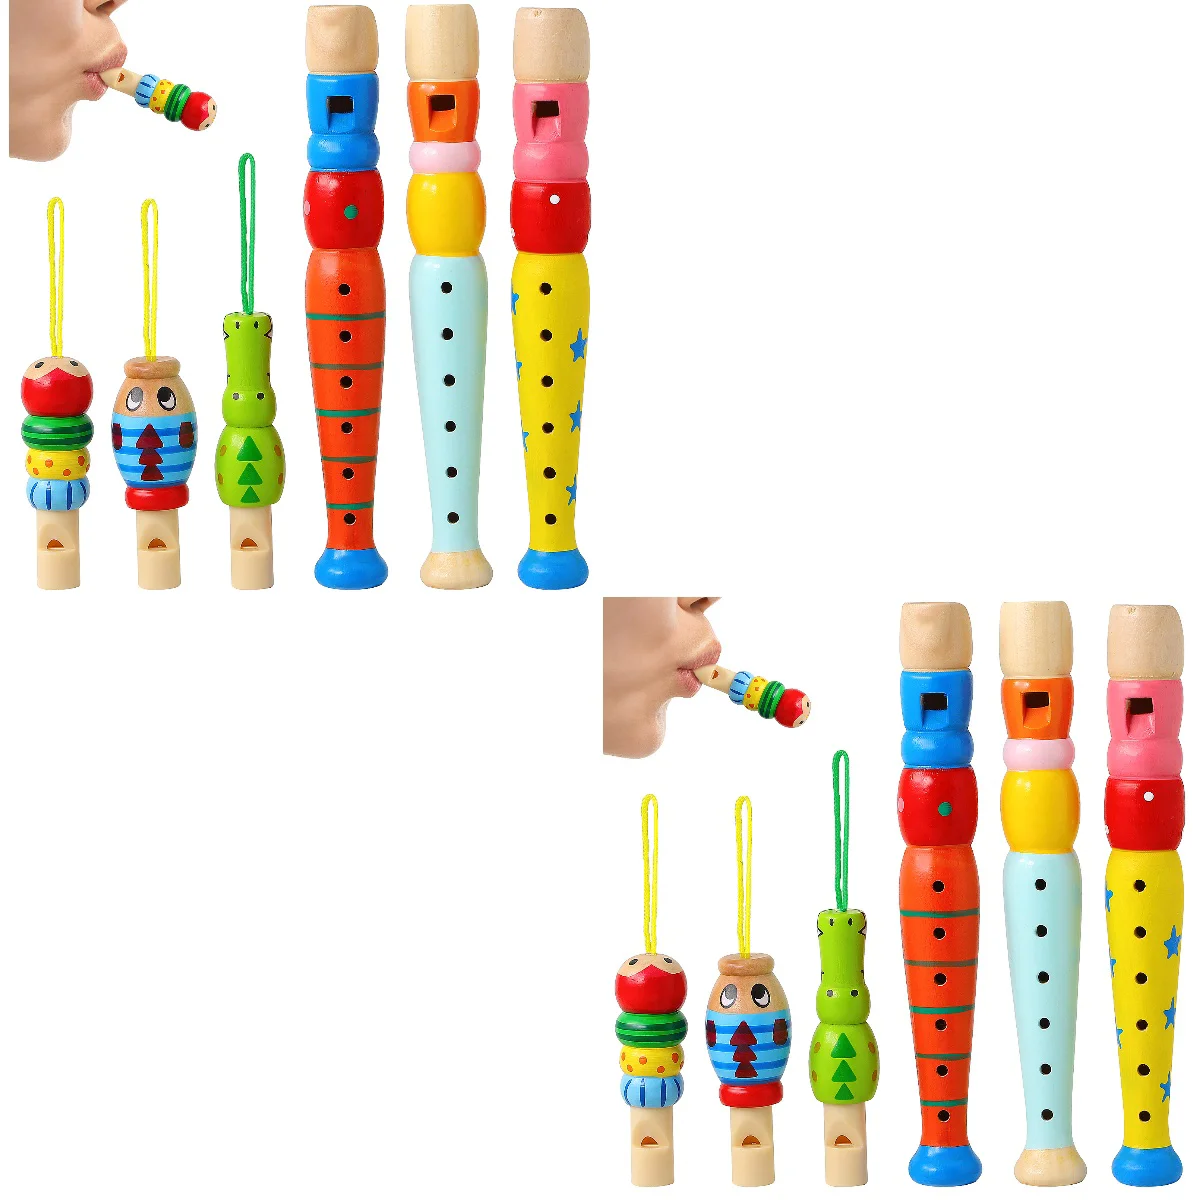 

6 Pcs Animal Whistles Wooden Whistle Toys with 3 Pcs Wooden Flute Toys Kids Toddlers Children Music Instrument Educational Toys